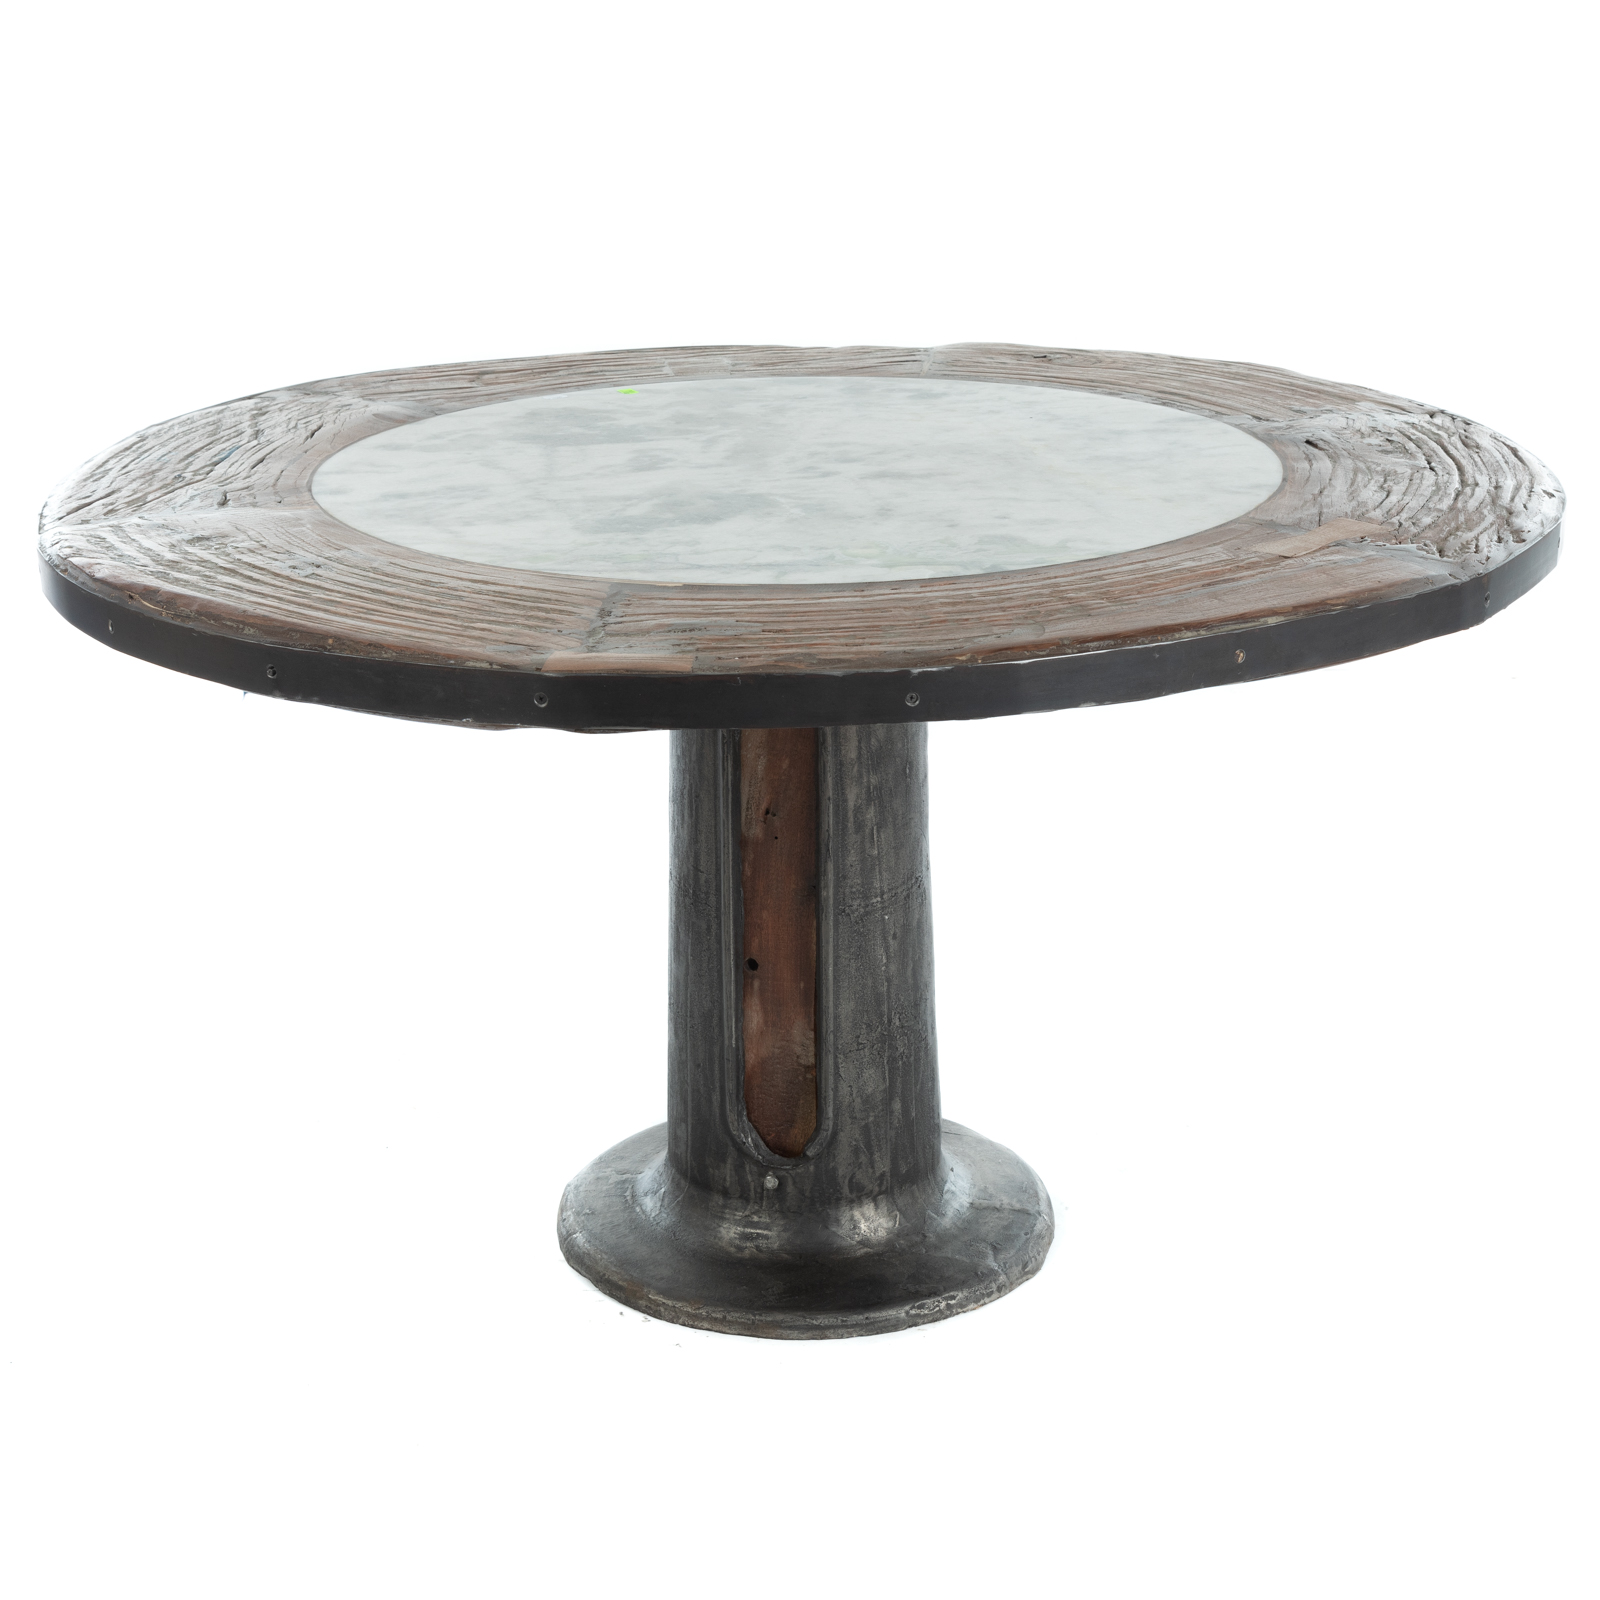 ROUND INDUSTRIAL RUSTIC DINING 36a762